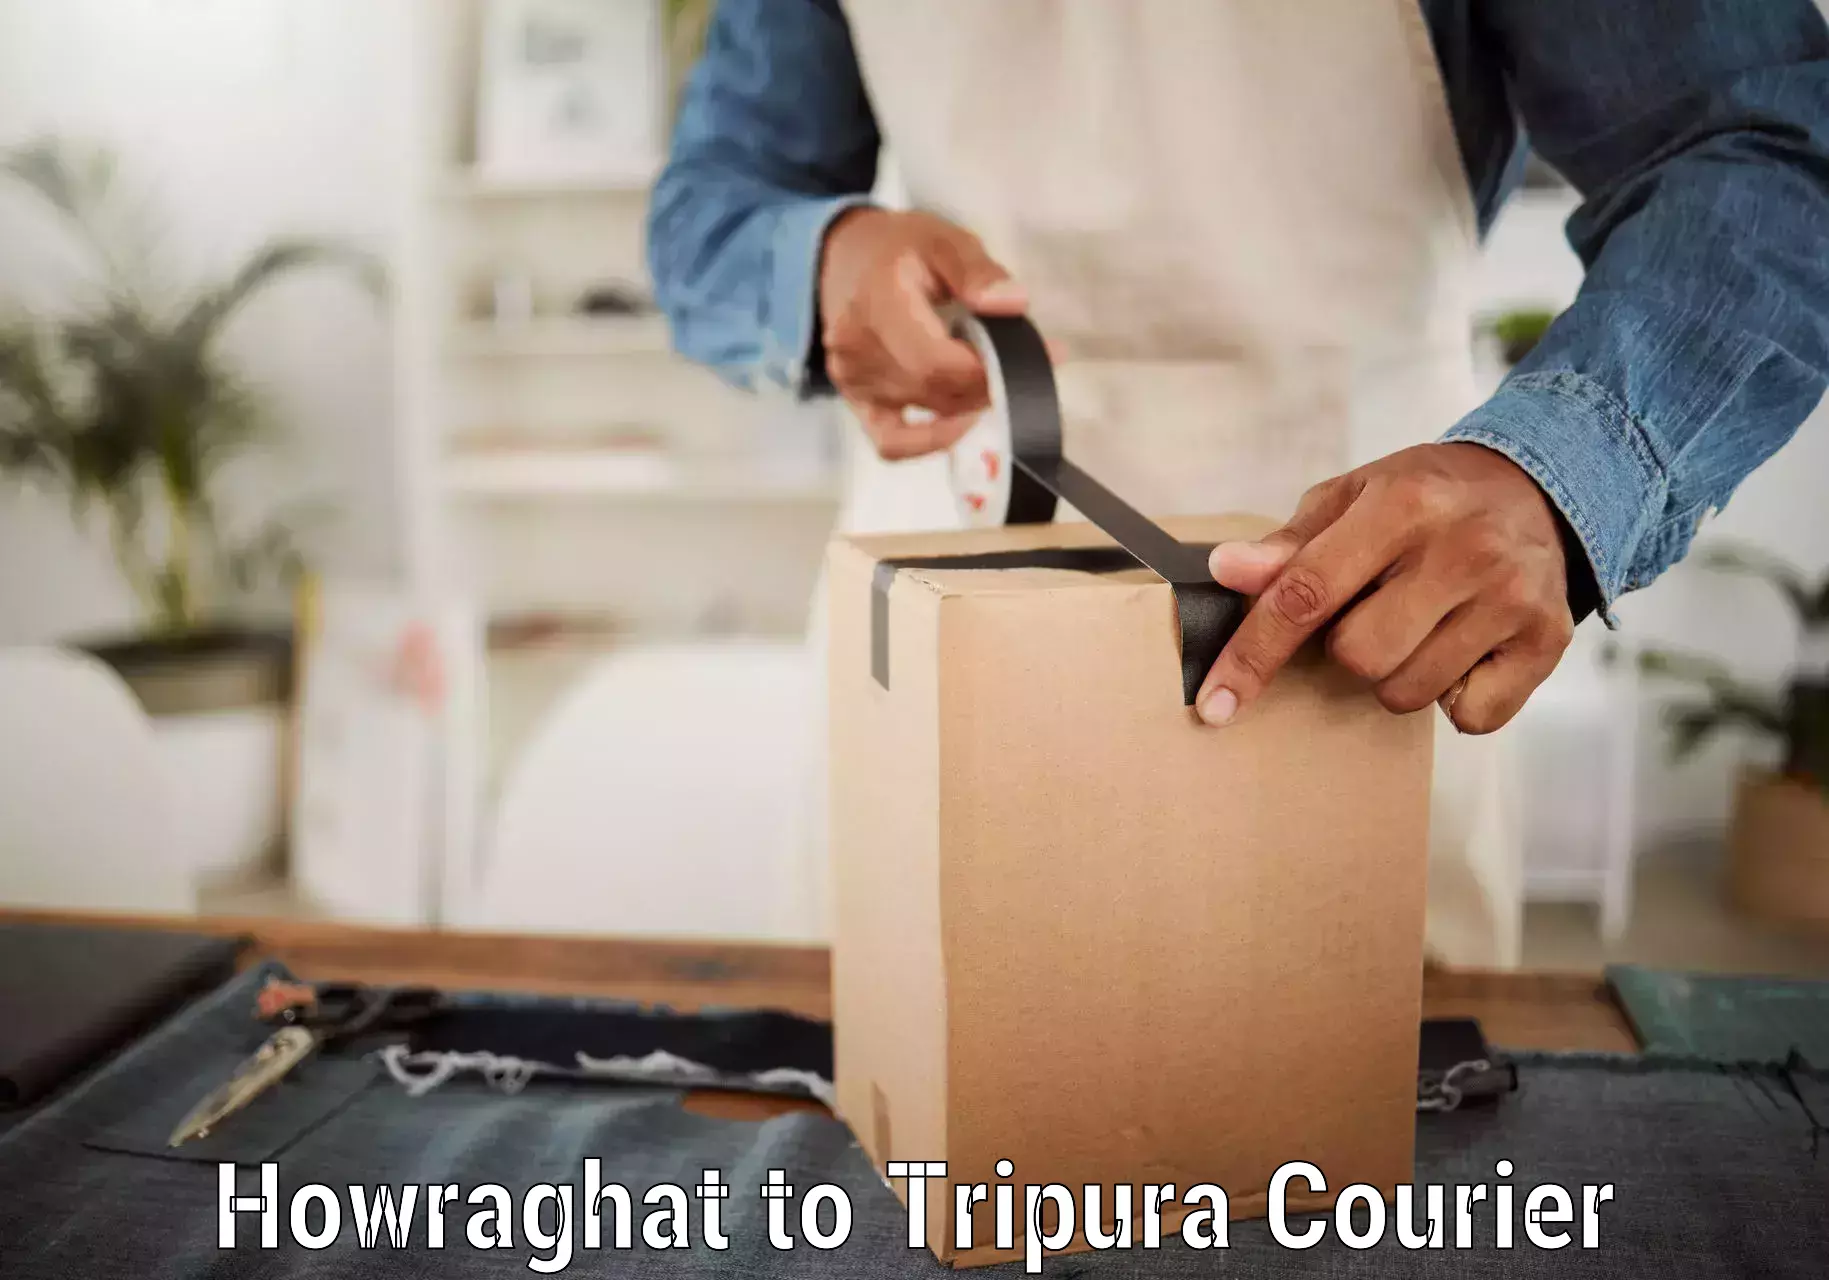 Personalized courier experiences in Howraghat to Agartala